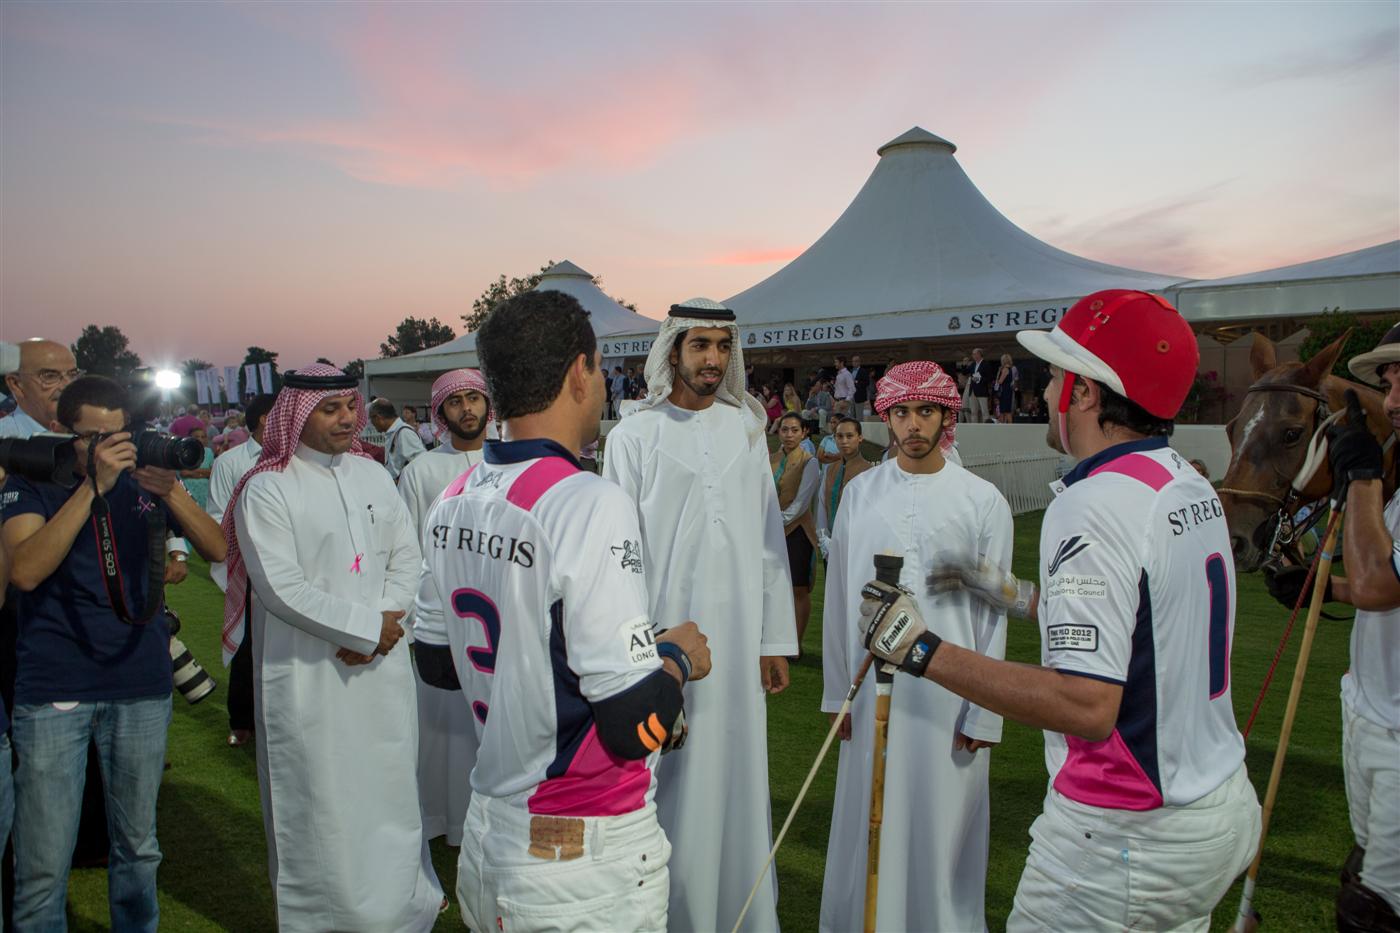 20121110-Pink-Polo-Match-HH-and-guests-at-st-regis-tent5G3A6655